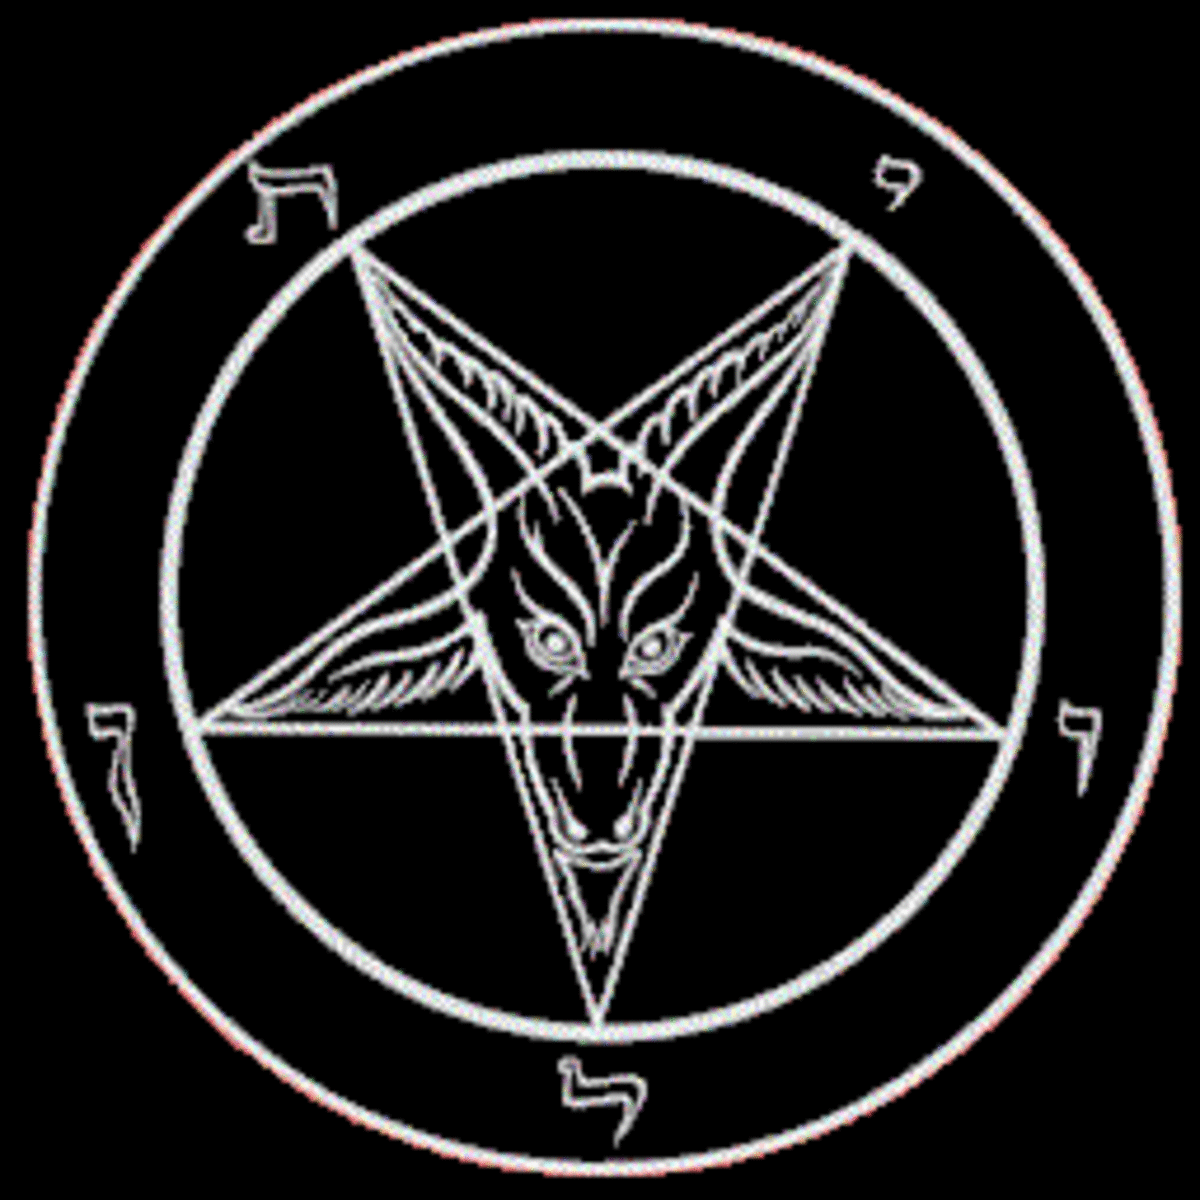 The Sigil of Baphomet was adopted by the Church of Satan as their official seal in the 1960s. The symbols adopted in their version promote autocracy and man embracing his carnal nature.  